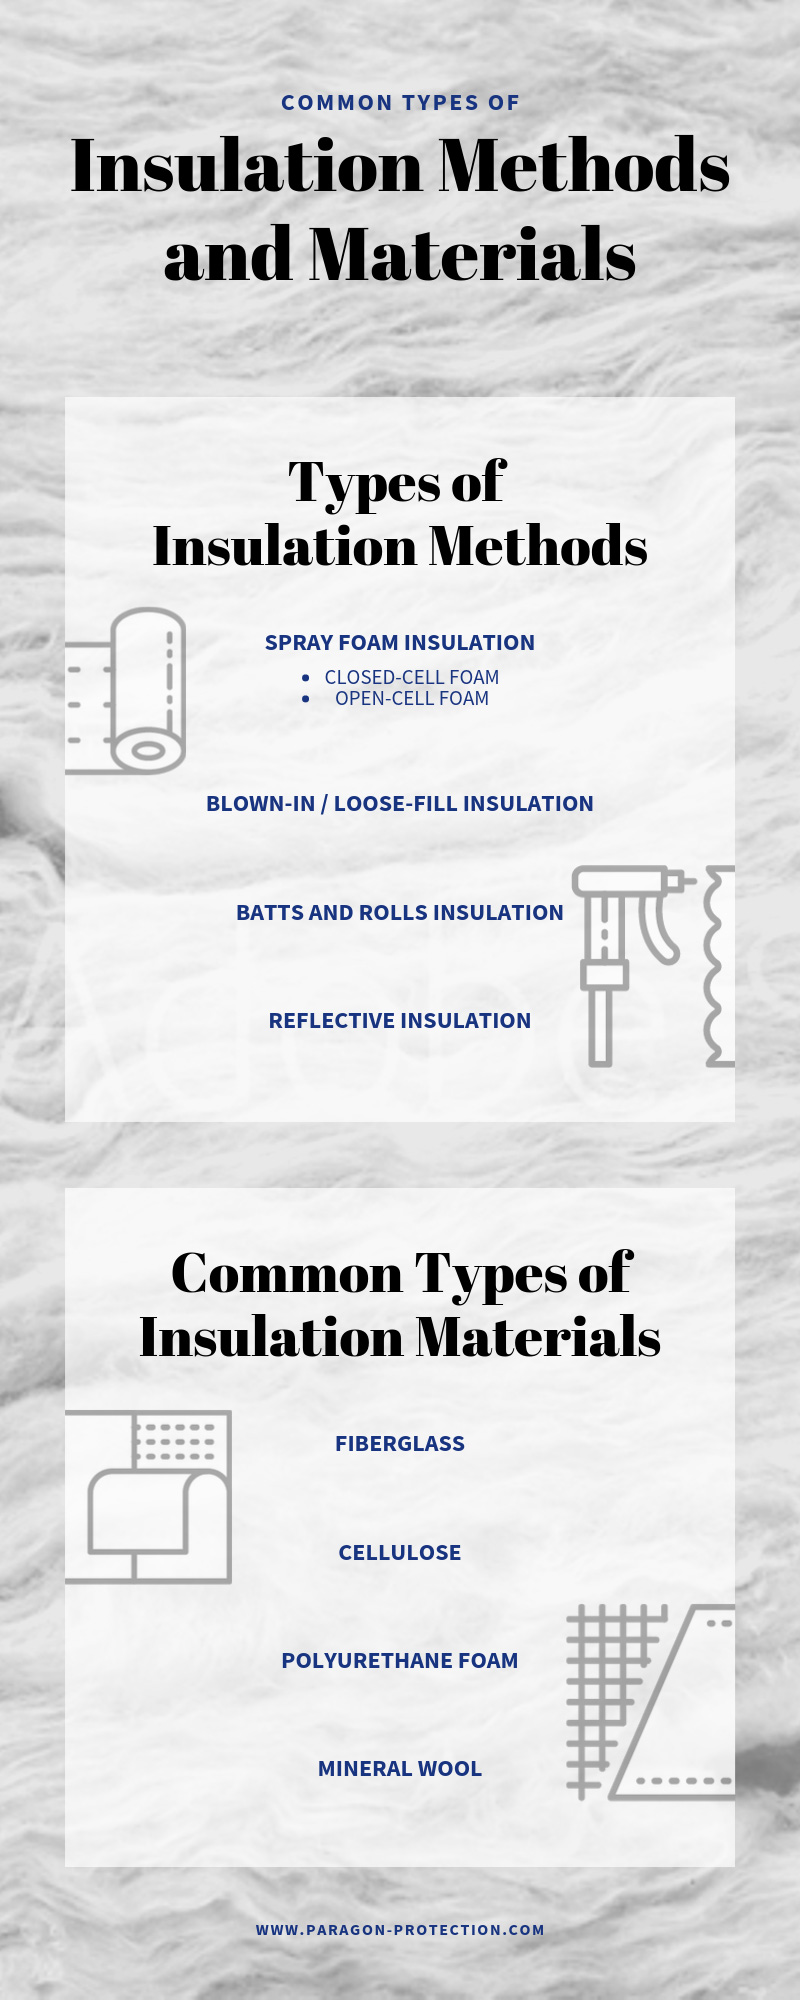 Common Types of Insulation Methods and Materials